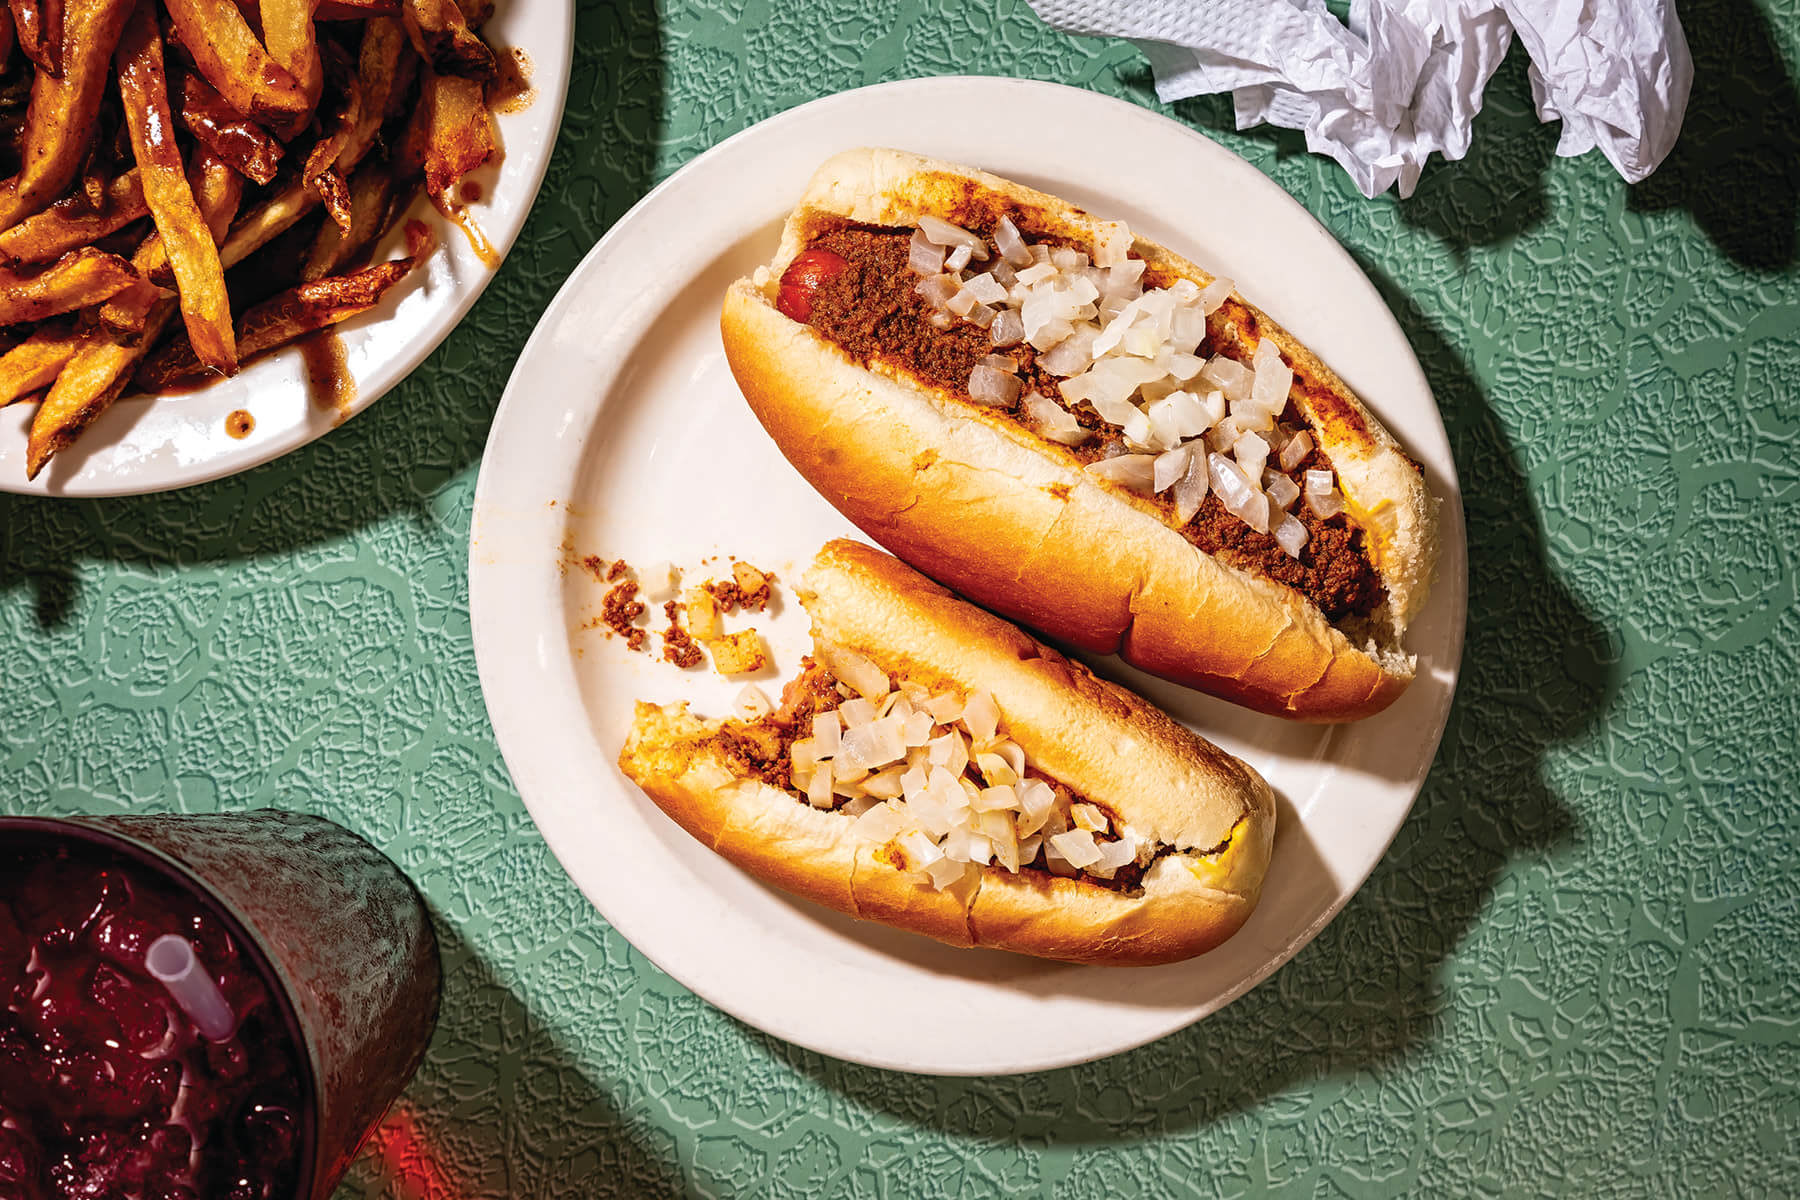 Hot dogs in Charlotte, NC. Your guide to 10 great places